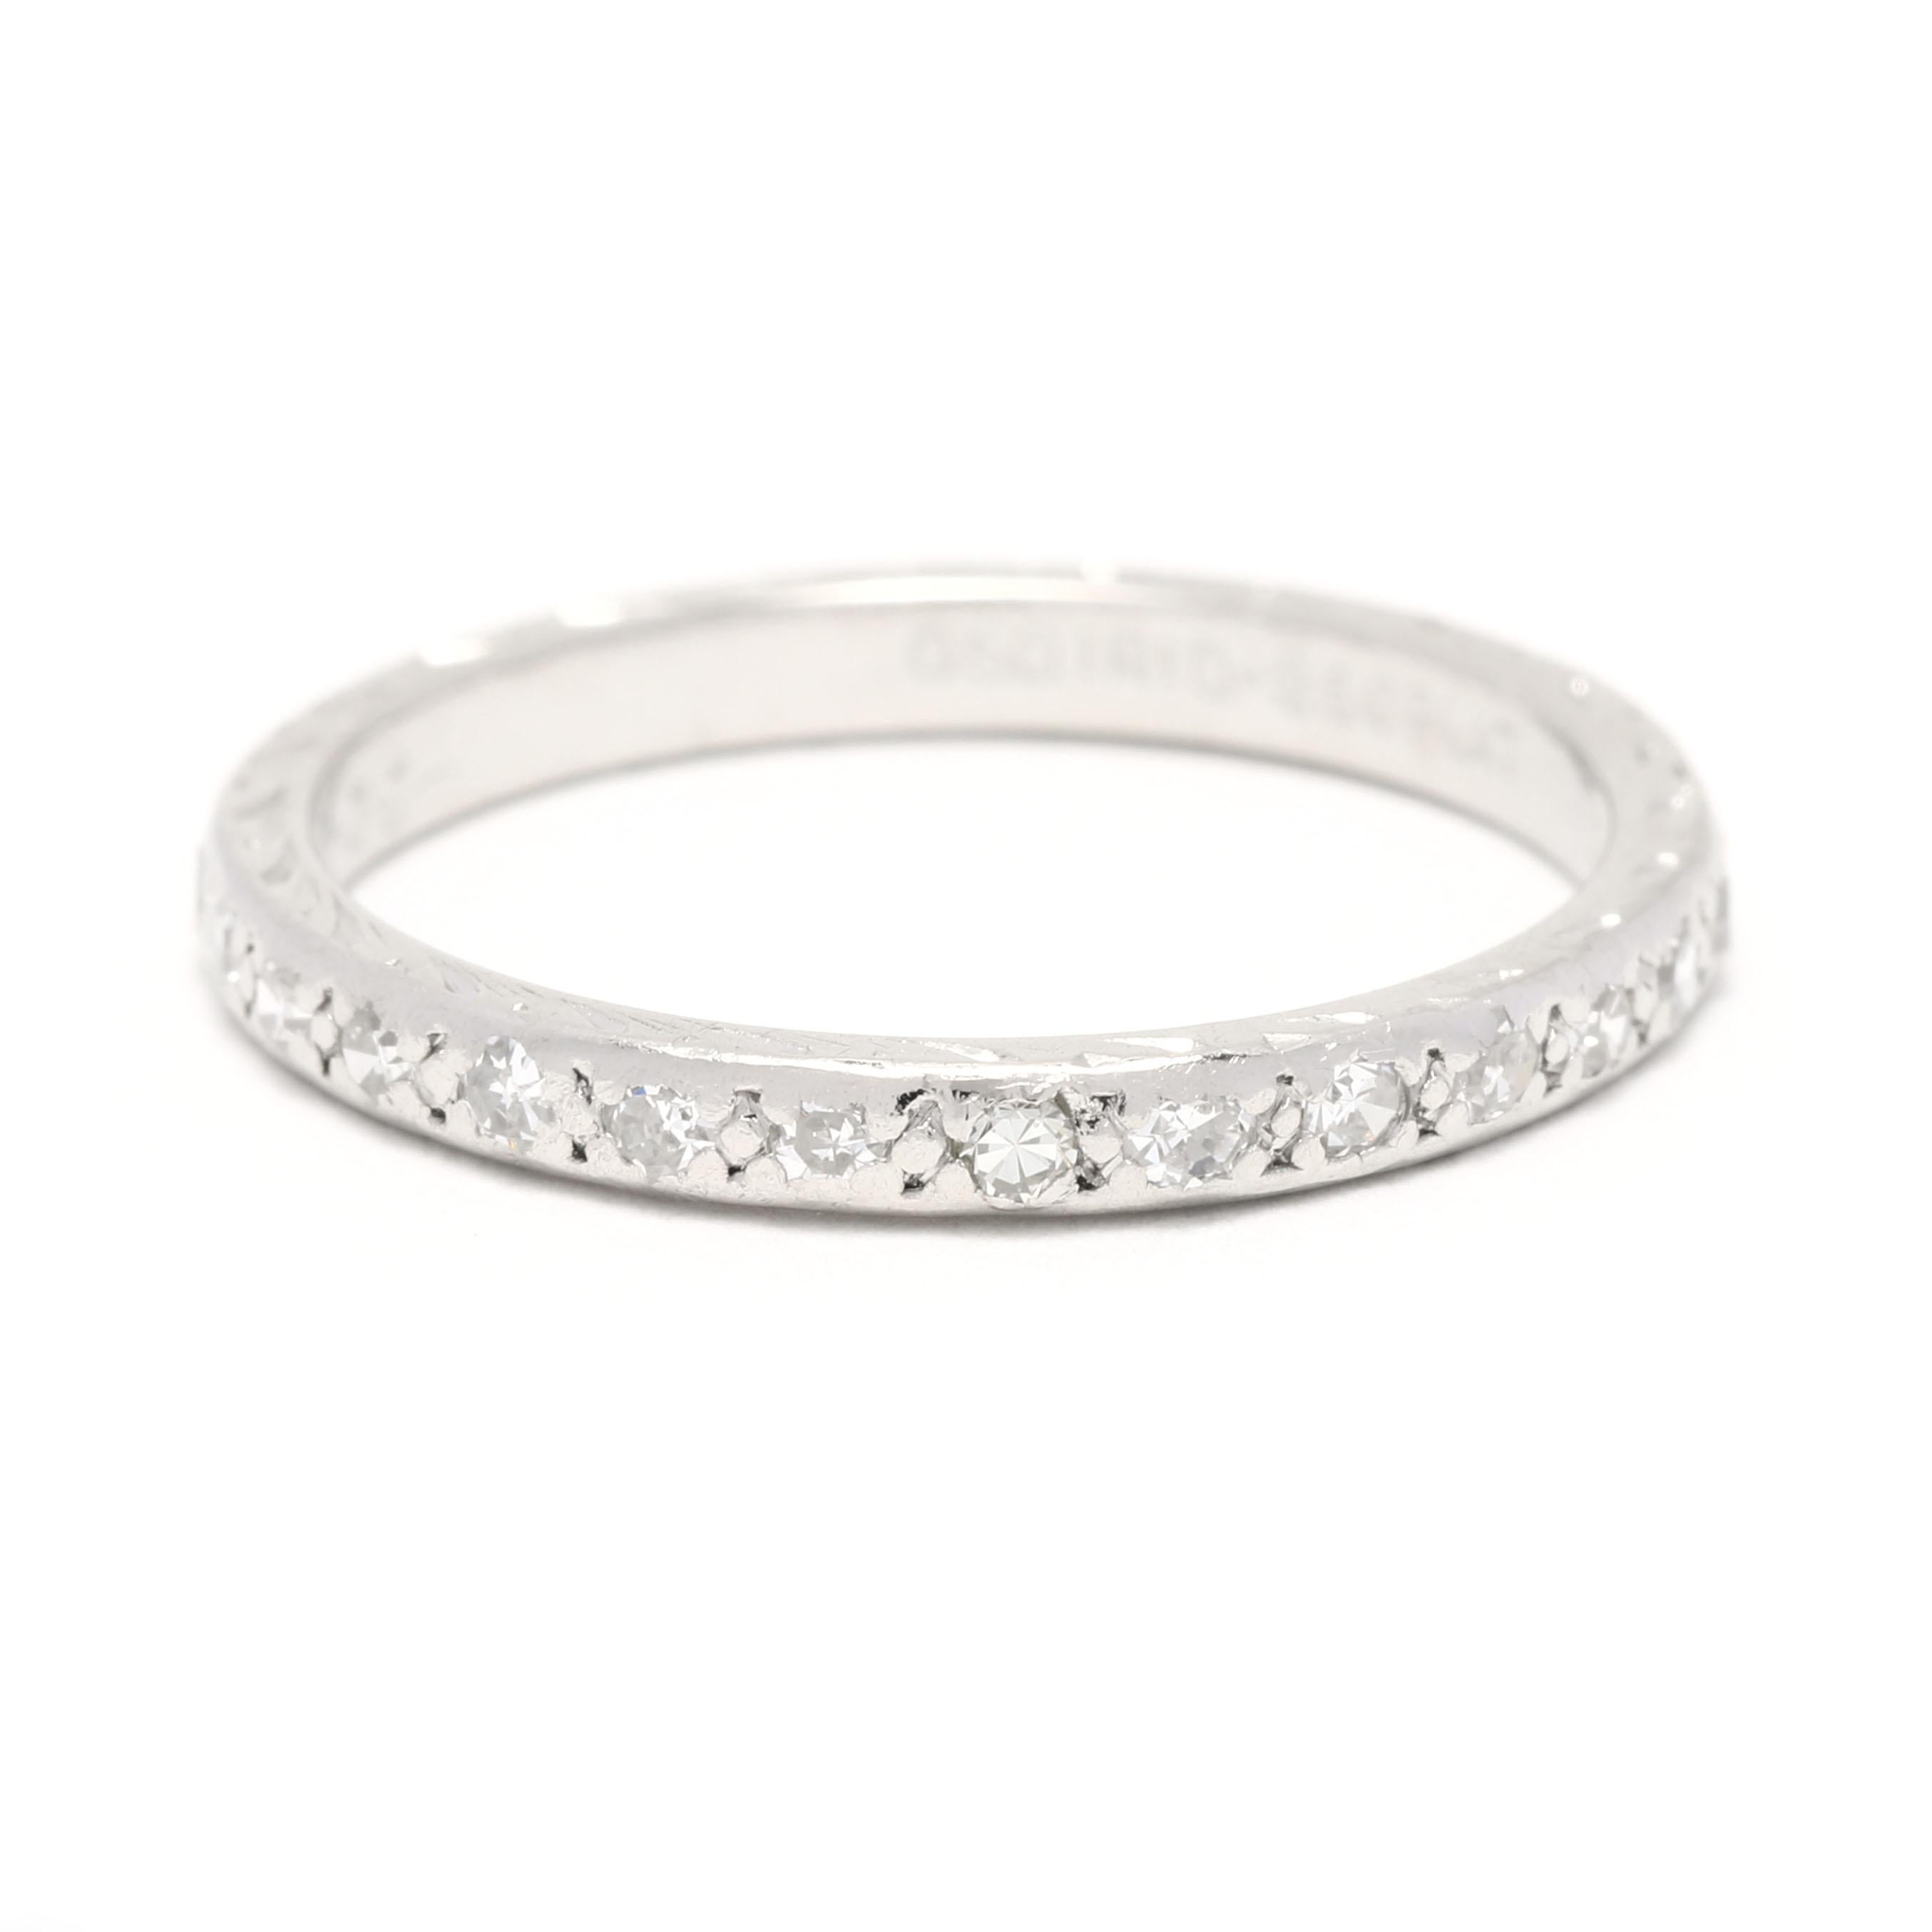 This stunning antique 0.15ctw diamond wedding band is crafted of platinum and is a ring size 4.75. The antique platinum band features a row of 0.15ctw diamonds, making it the perfect stackable diamond band for any special occasion. This beautiful